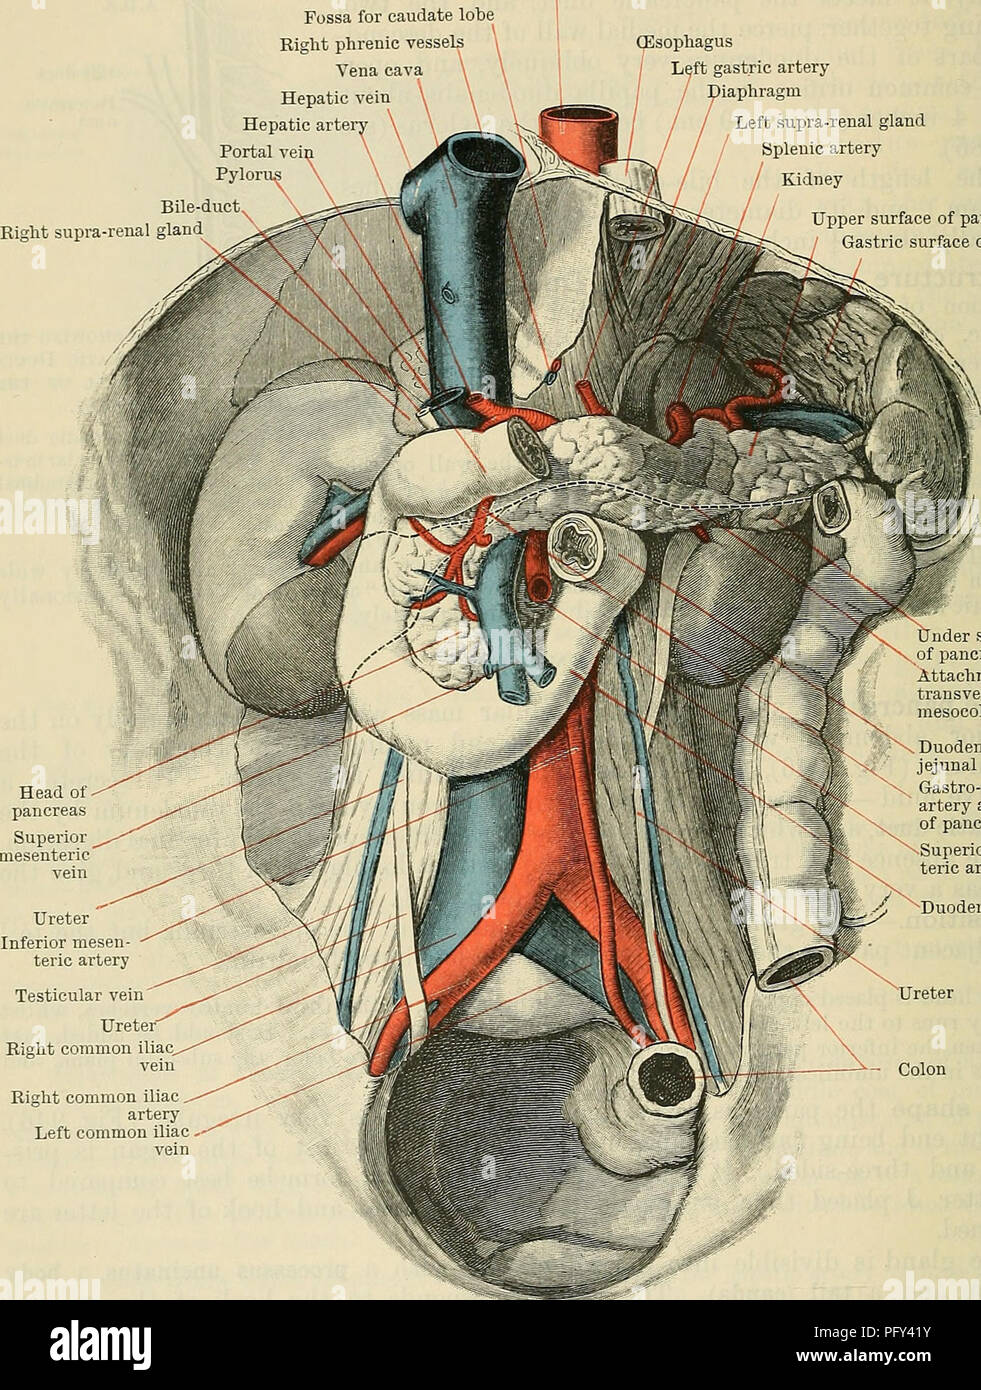 . Cunningham's Text-book of anatomy. Anatomy. 1204 THE DIGESTIVE SYSTEM. expressed as follows :-The head (Fig. 946) lies in the concavity of the duodenum, with the vena cava inferior and abdominal aorta behind it; the body crosses the Aorta Fossa for caudate lobe Right phrenic vessels Vena cava Hepatic vein Hepatic arte Portal vei Pylor Bile-duct Right supra-renal gland^ (Esophagus Left gastric artery diaphragm Left supra-renal gland Splenic artery Kidney Upper surface of pancreas / Gastric surface of spleen. Testicular vein Ureter&quot; Right common iliac Right common iliac artery Left common Stock Photo